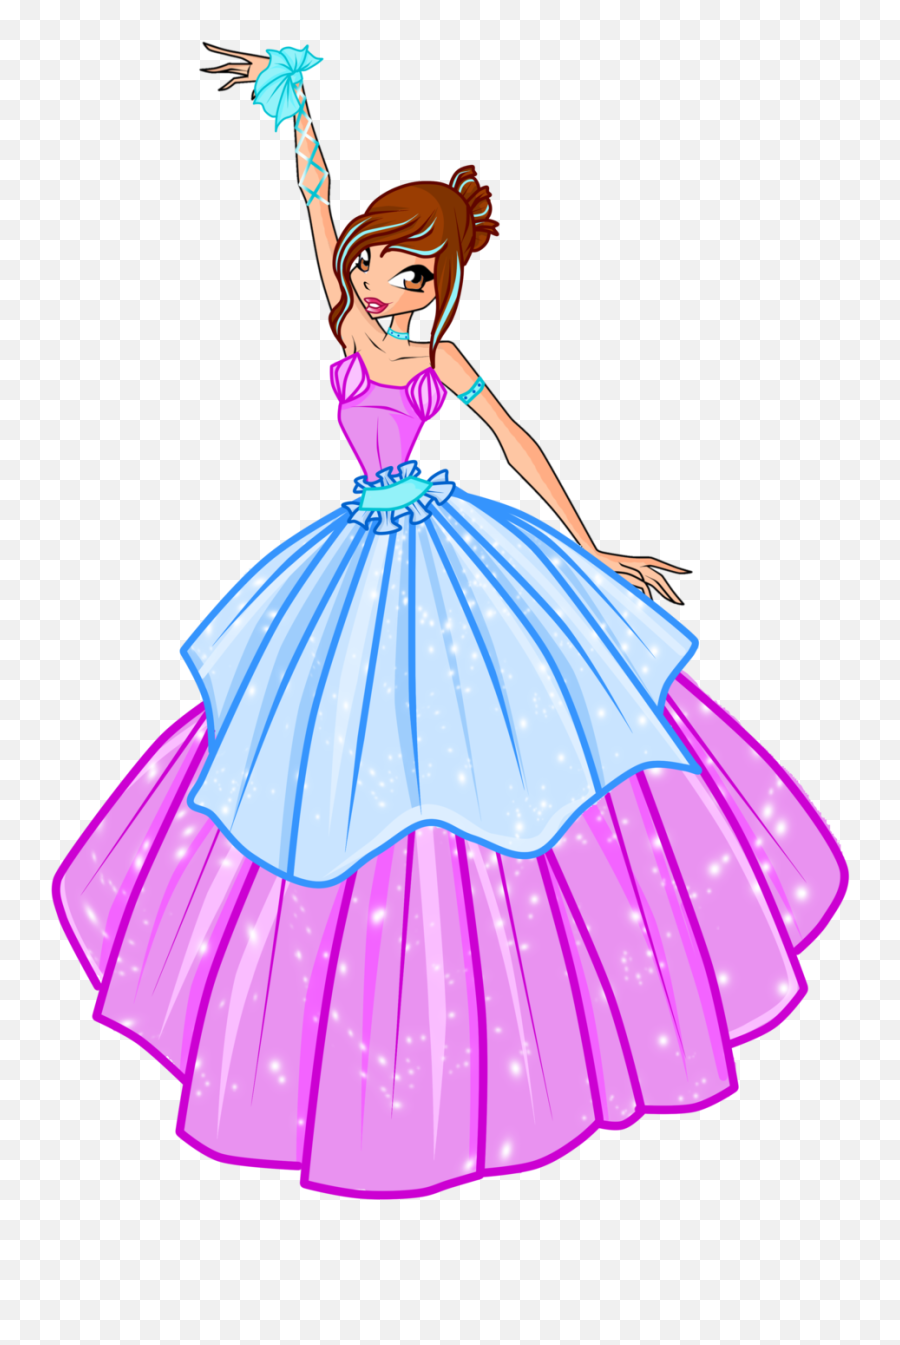 Blue Dress Clipart Ball Gown Pencil And In Color Blue - Winx Ball Gown Gown Clipart Emoji,Dress Clipart